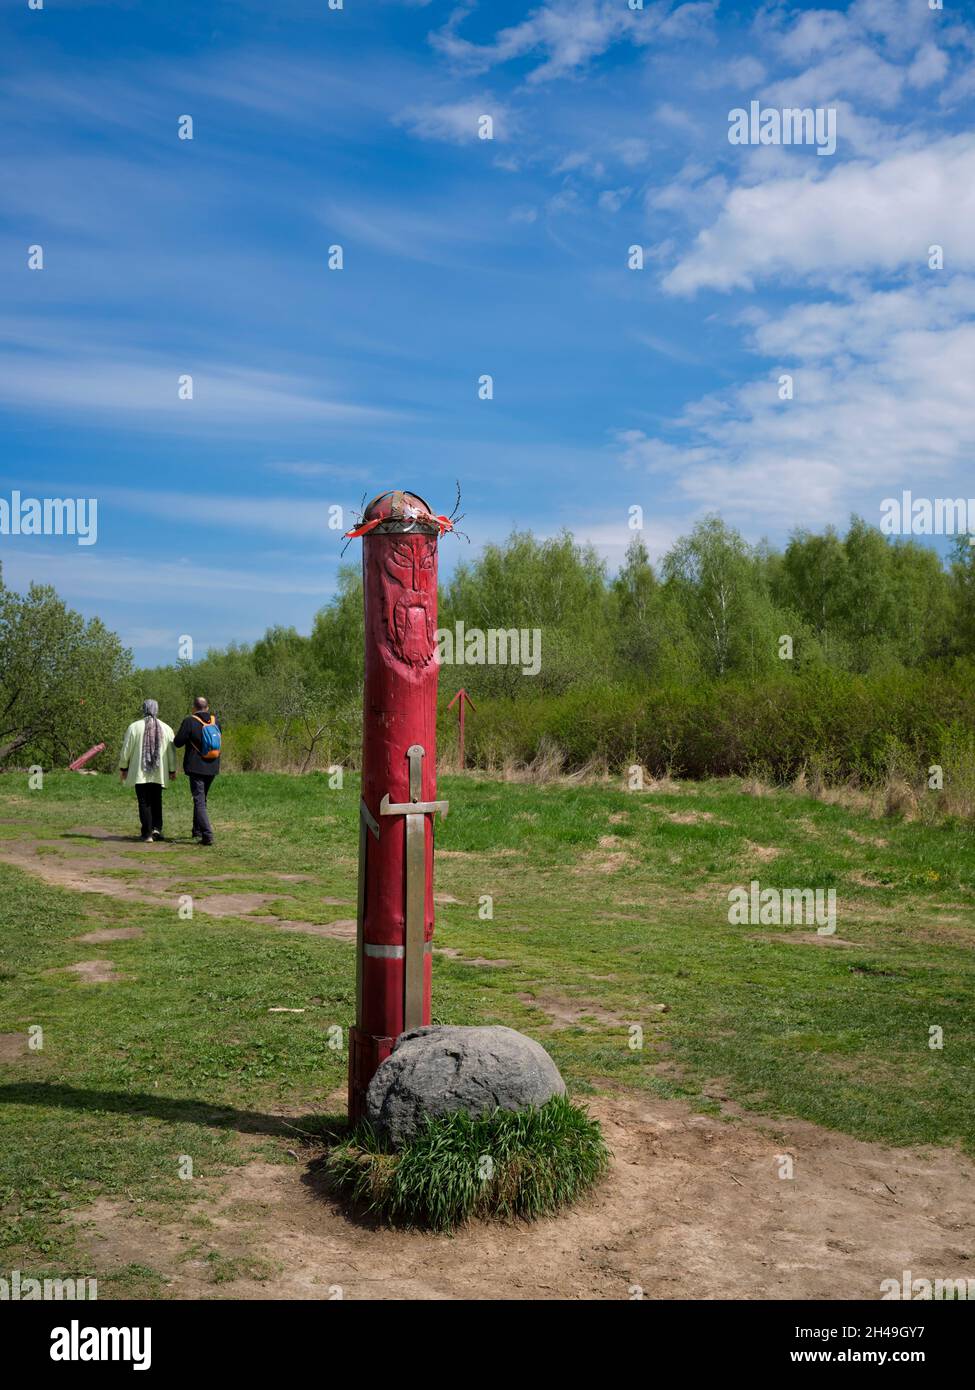 Slavic pagan idol with a stone altar standing near contemporary pagan temple in Bitsevski Park (Bitsa Park). Moscow, Russia. Stock Photo